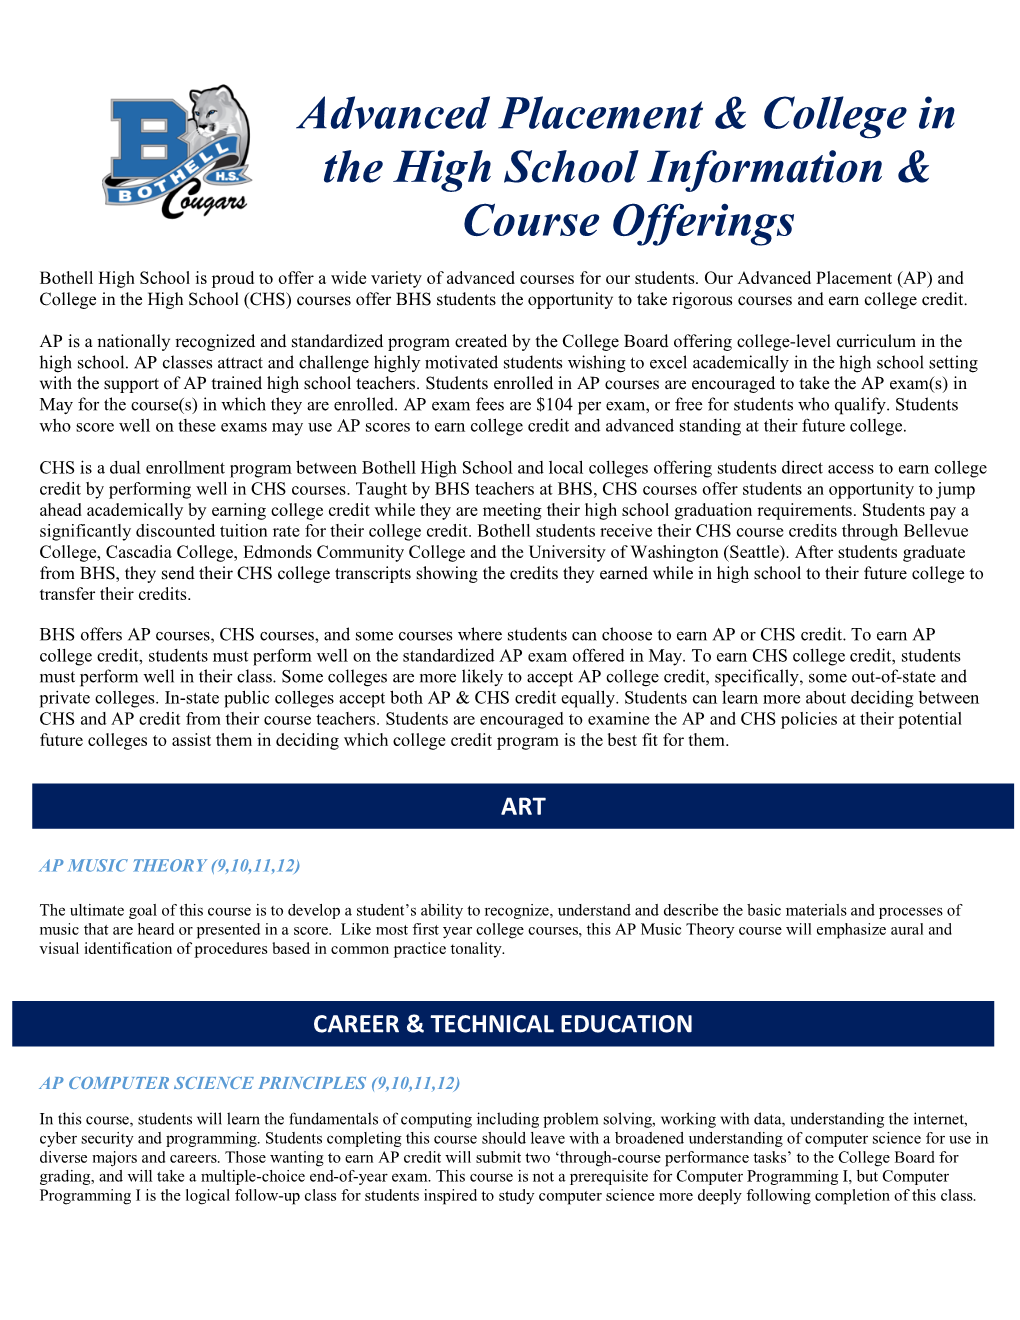 Advanced Placement & College in the High School Information & Course Offerings